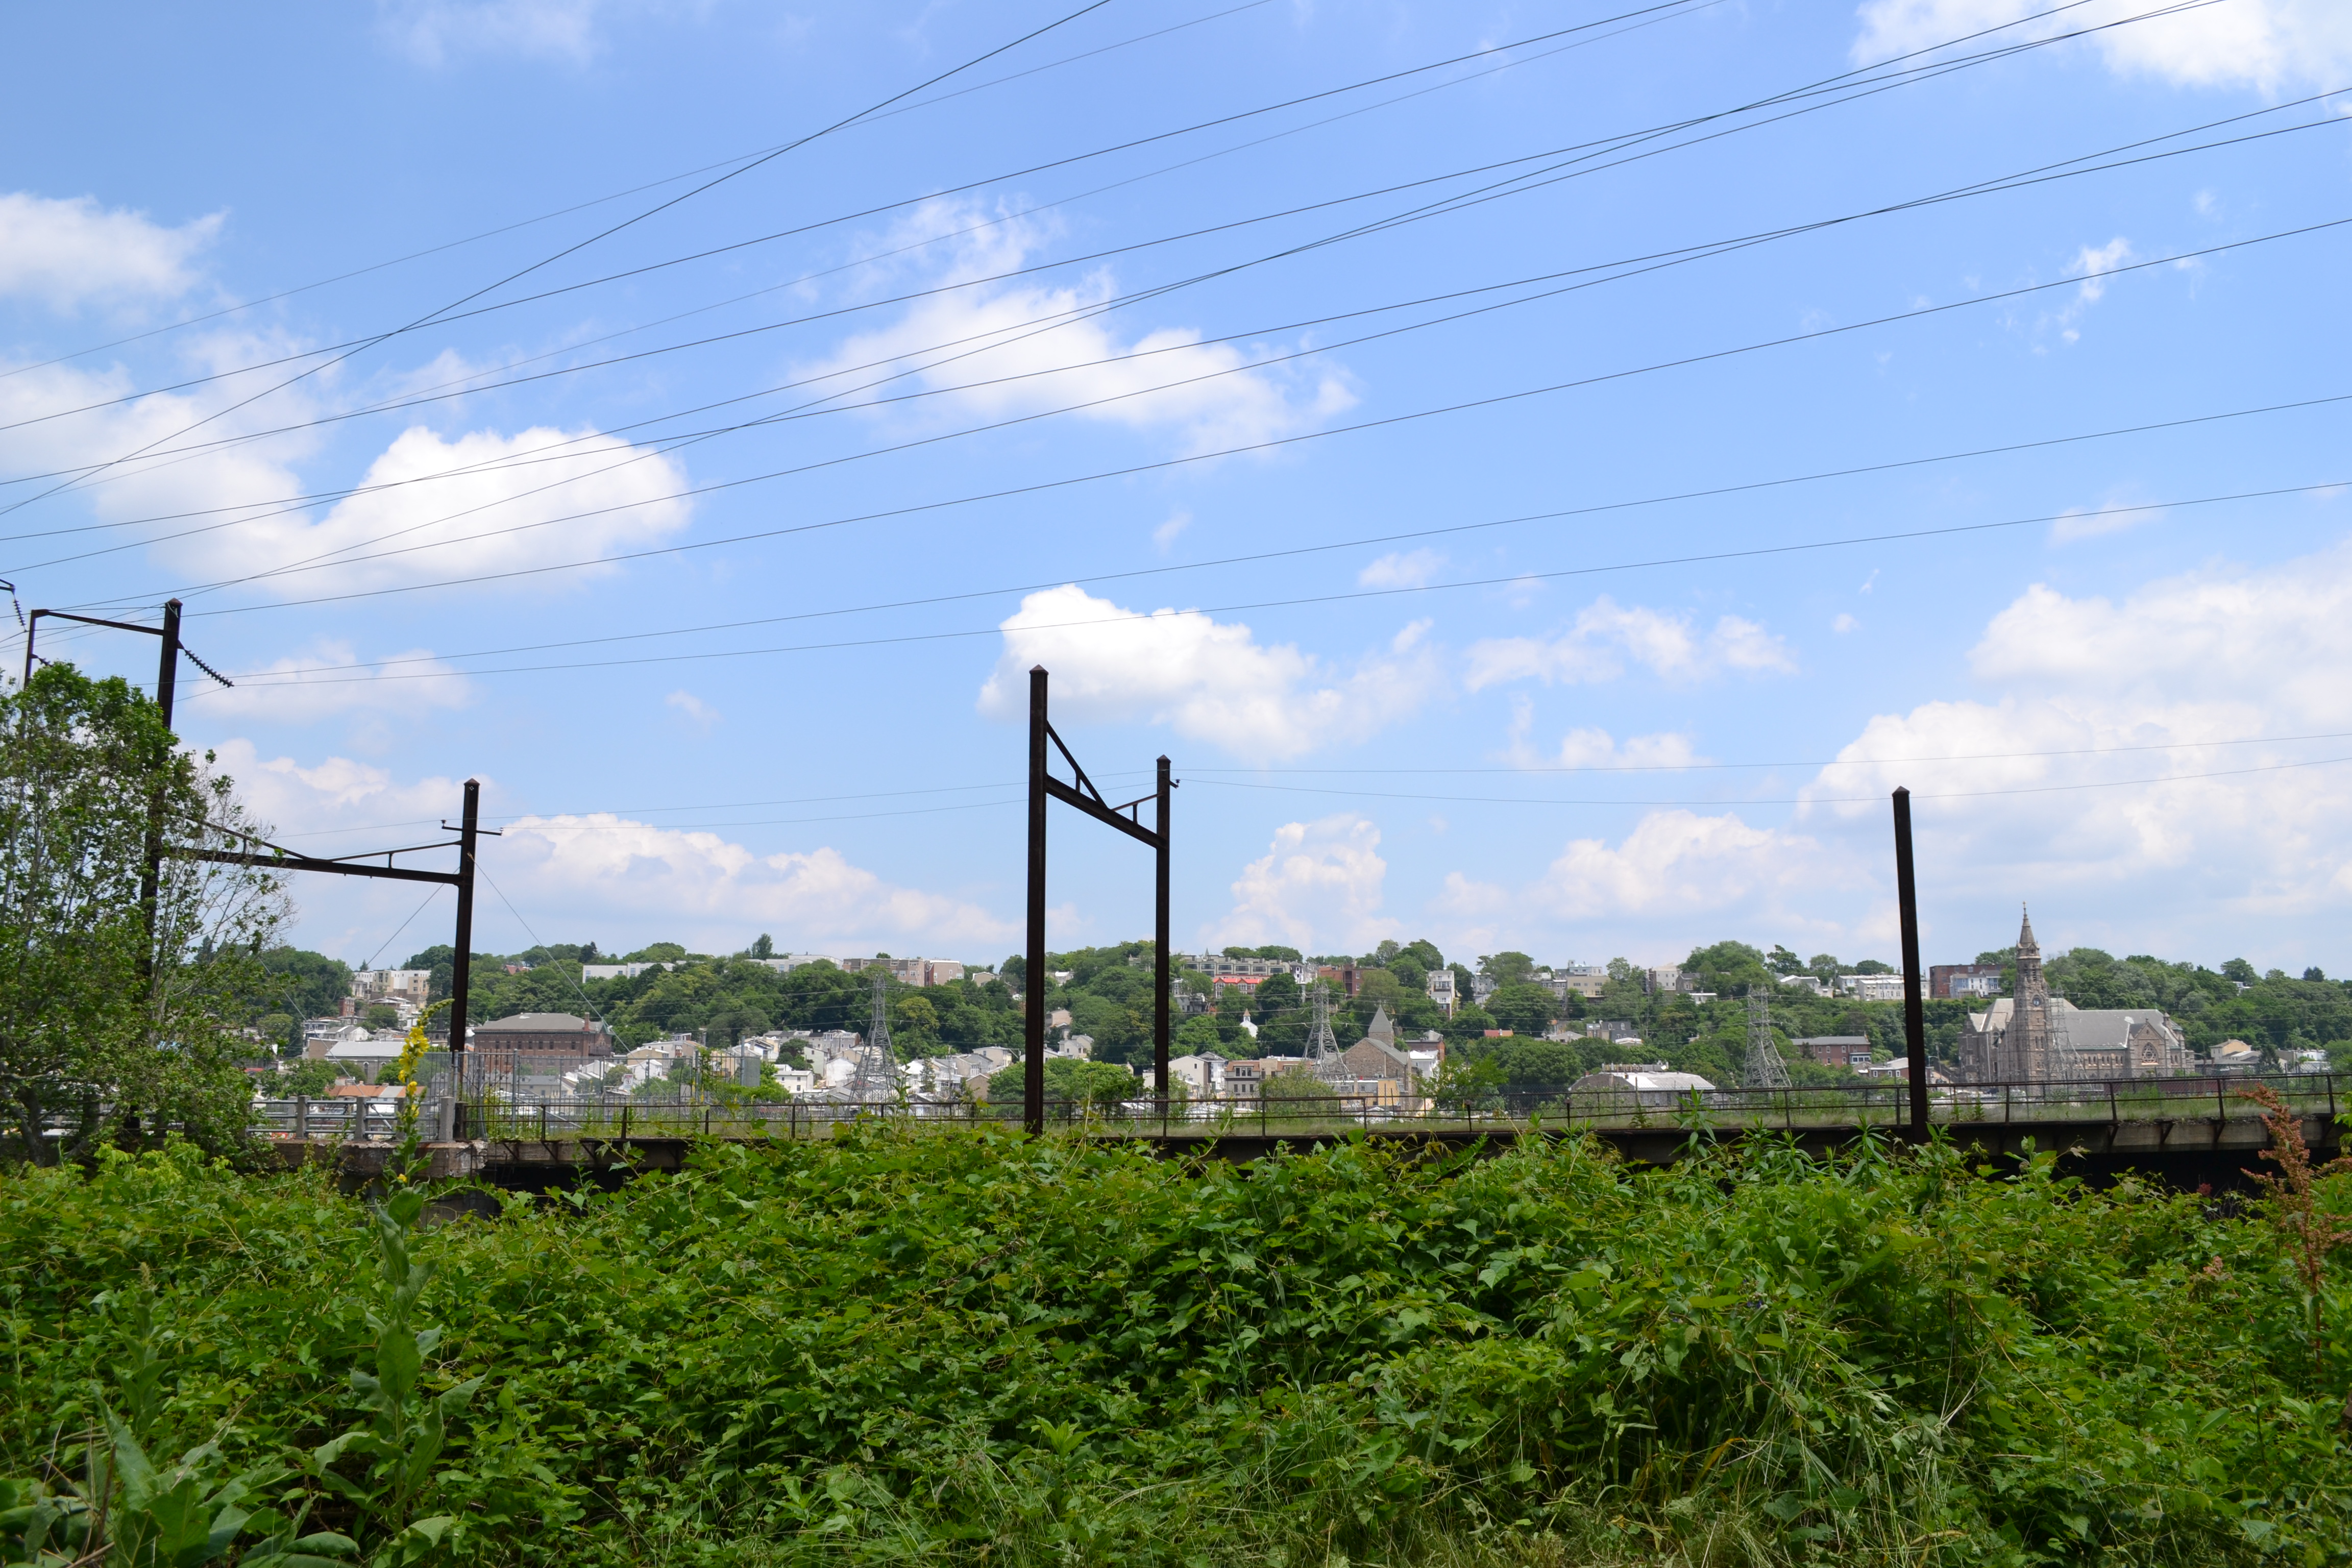 The Cynwyd Heritage Trail feeds into and extends just beyond the Manayunk Bridge